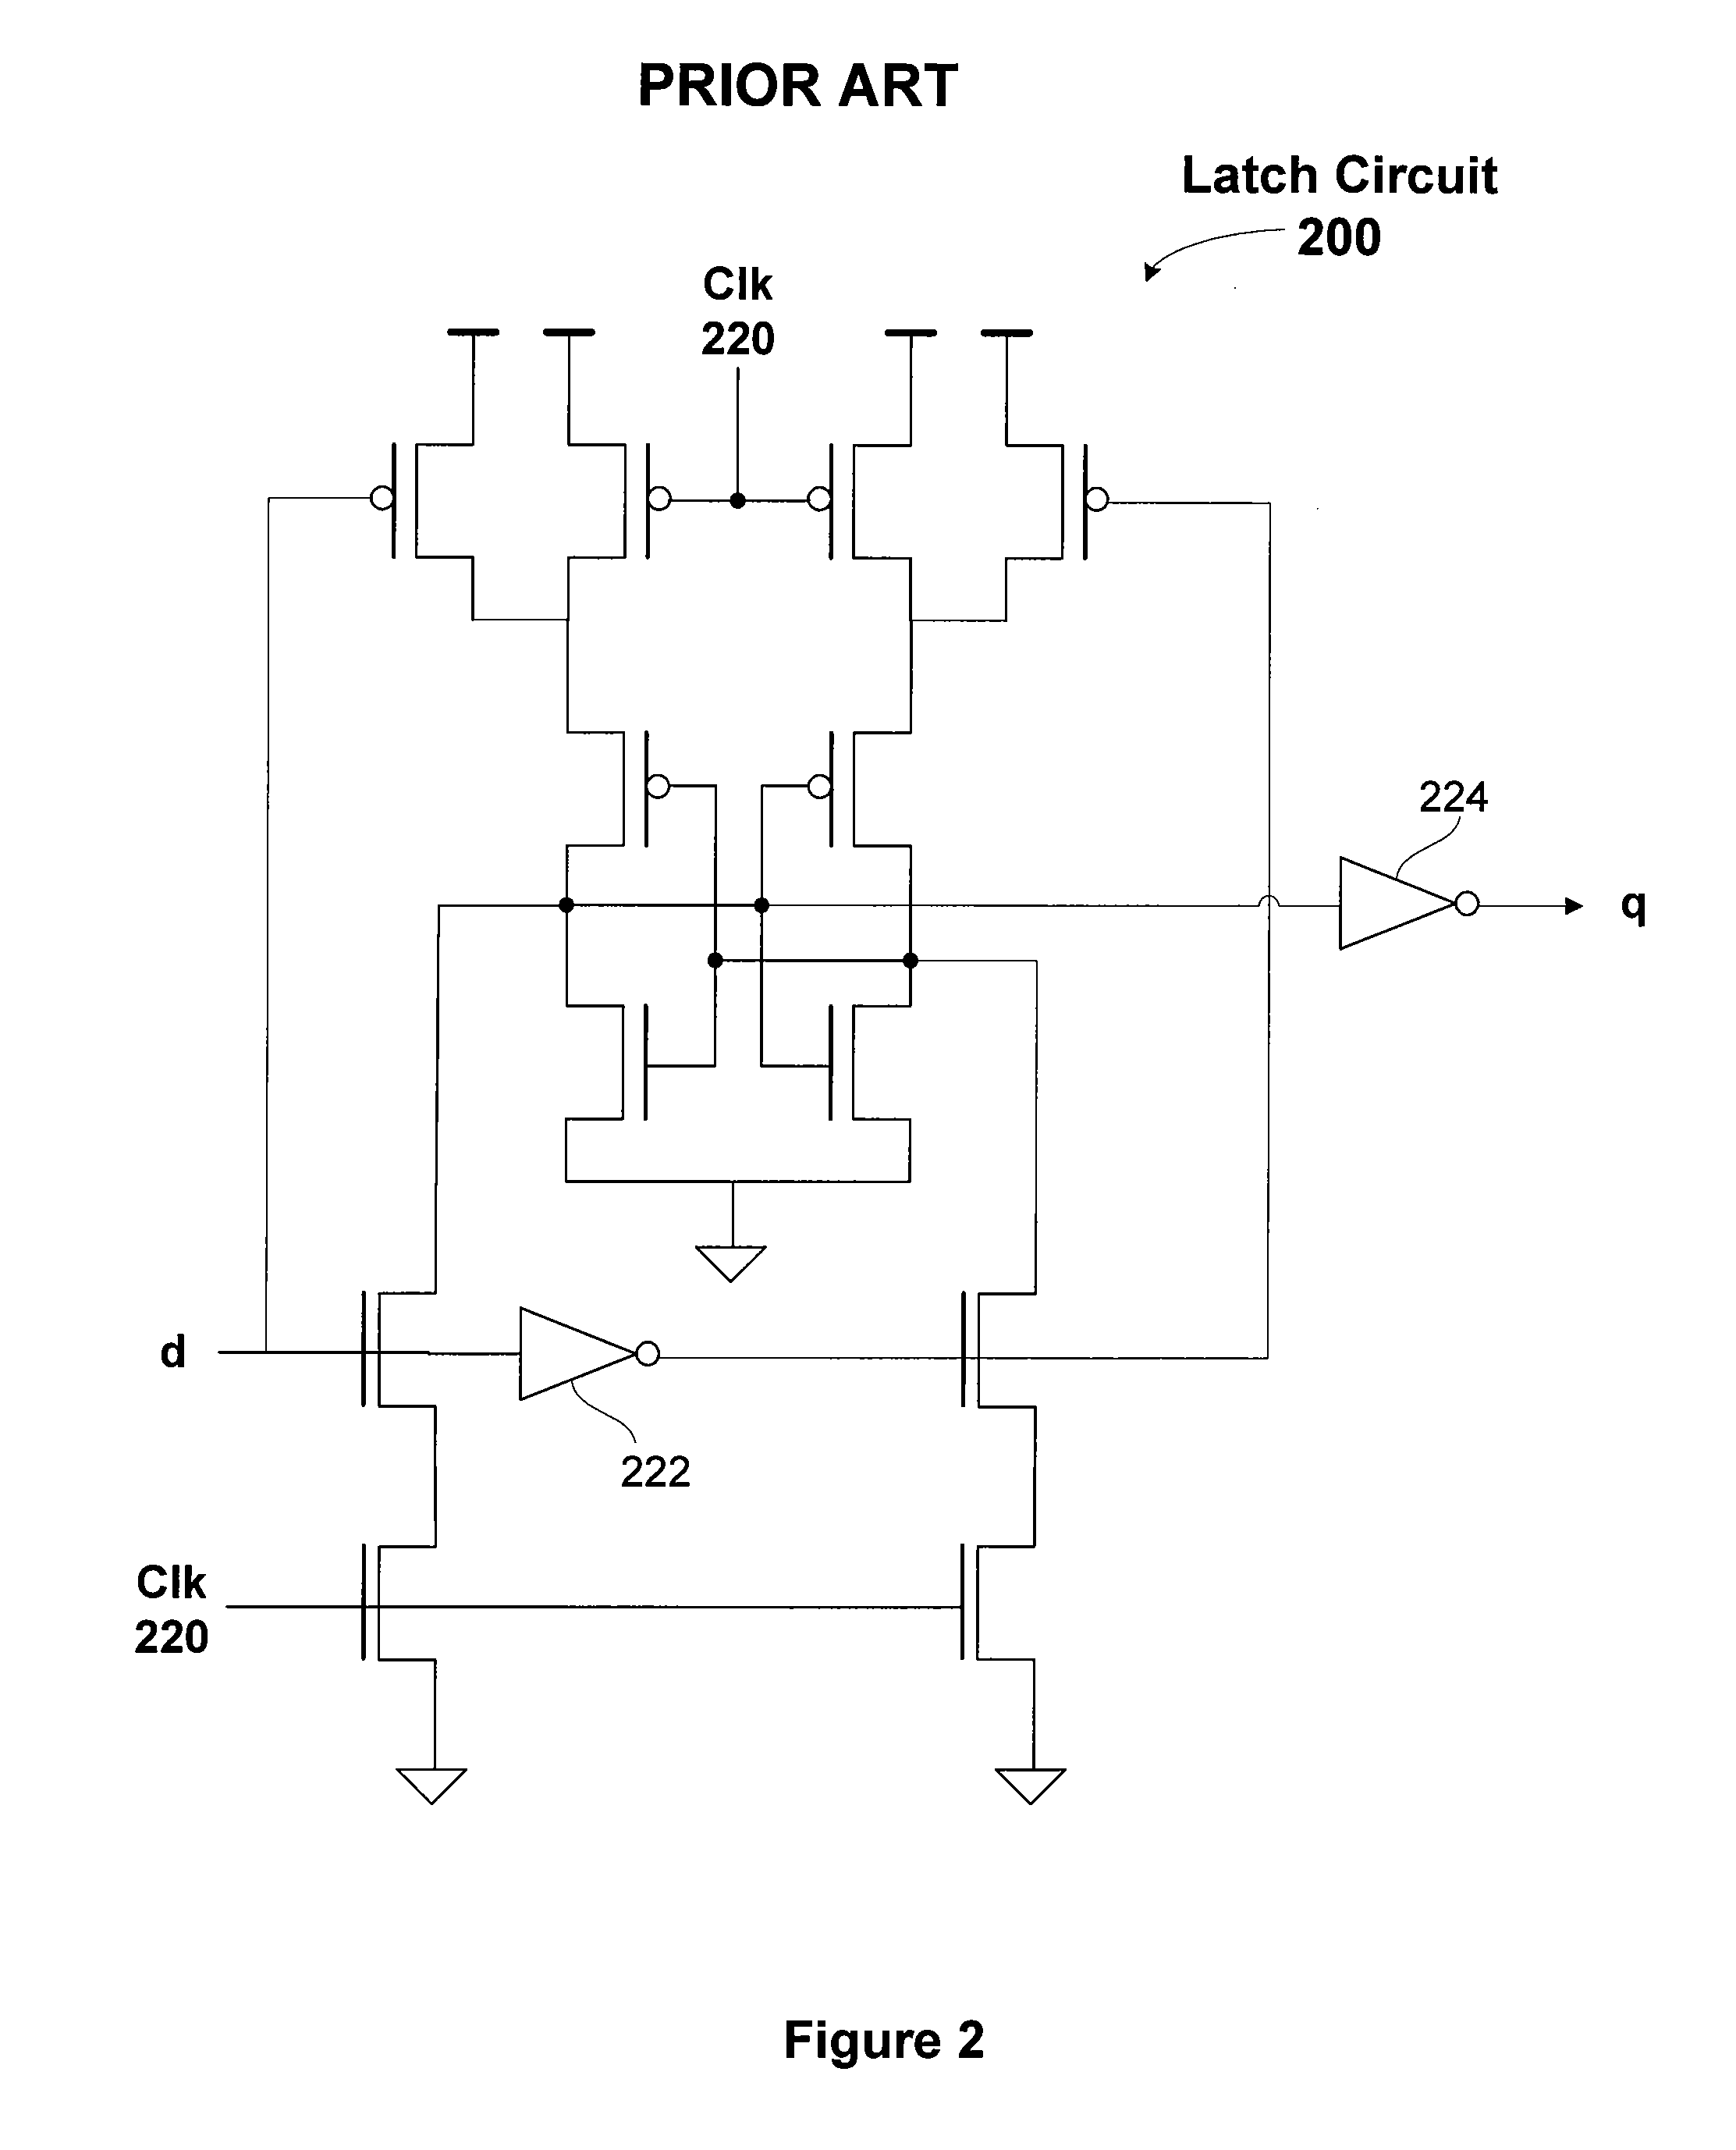 Low-Clock-Energy, Fully-Static Latch Circuit